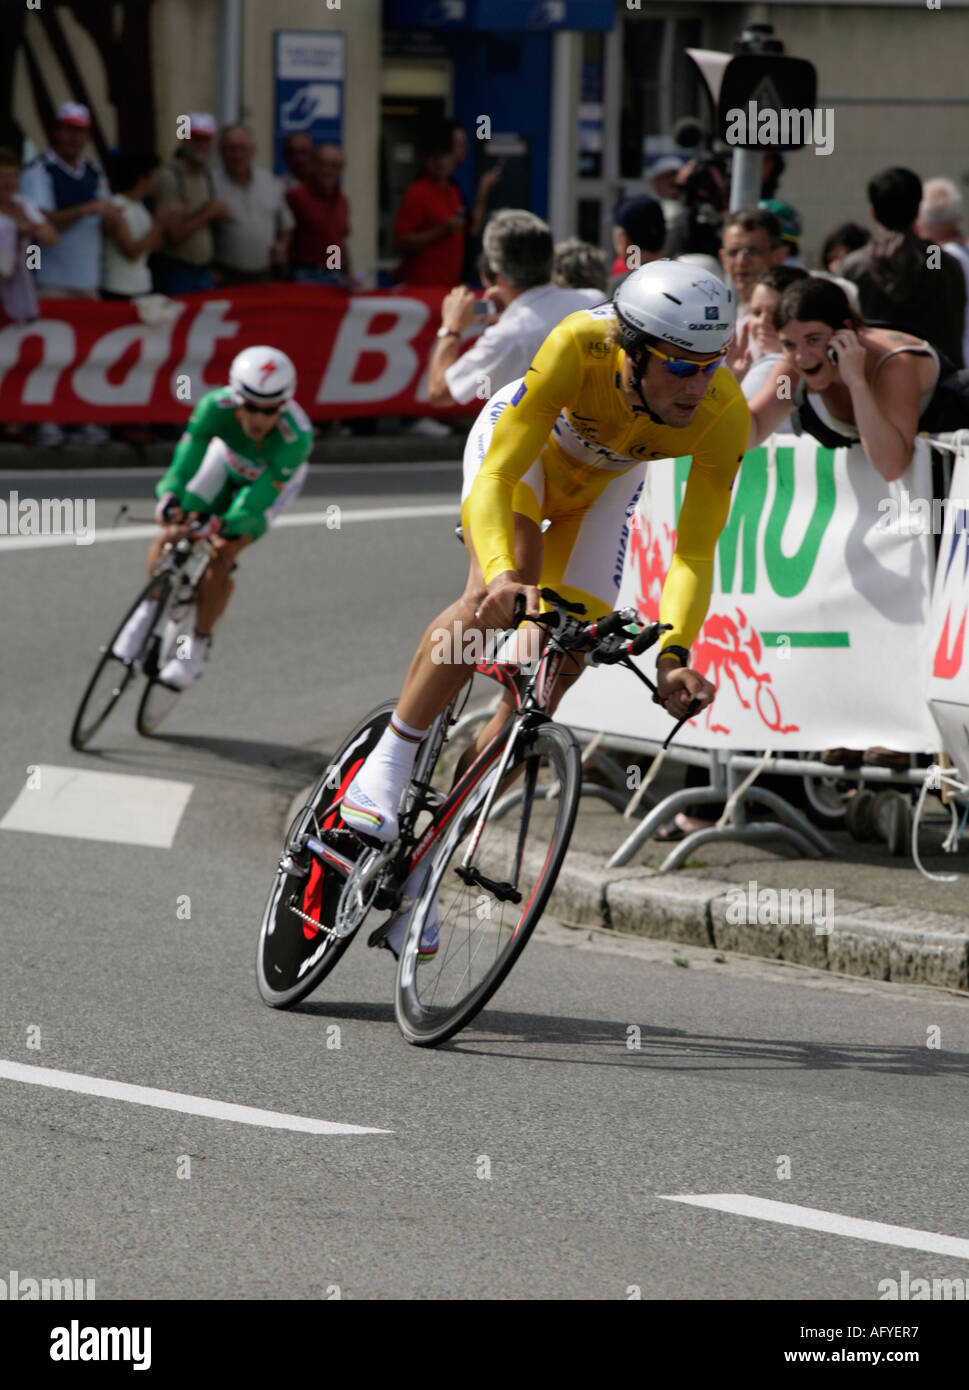 Tom Boonen Leader  yellow jersey leads Robbie McEwen  Points leader in green Tour De France 2006 Rennes time trial stage 7 Stock Photo